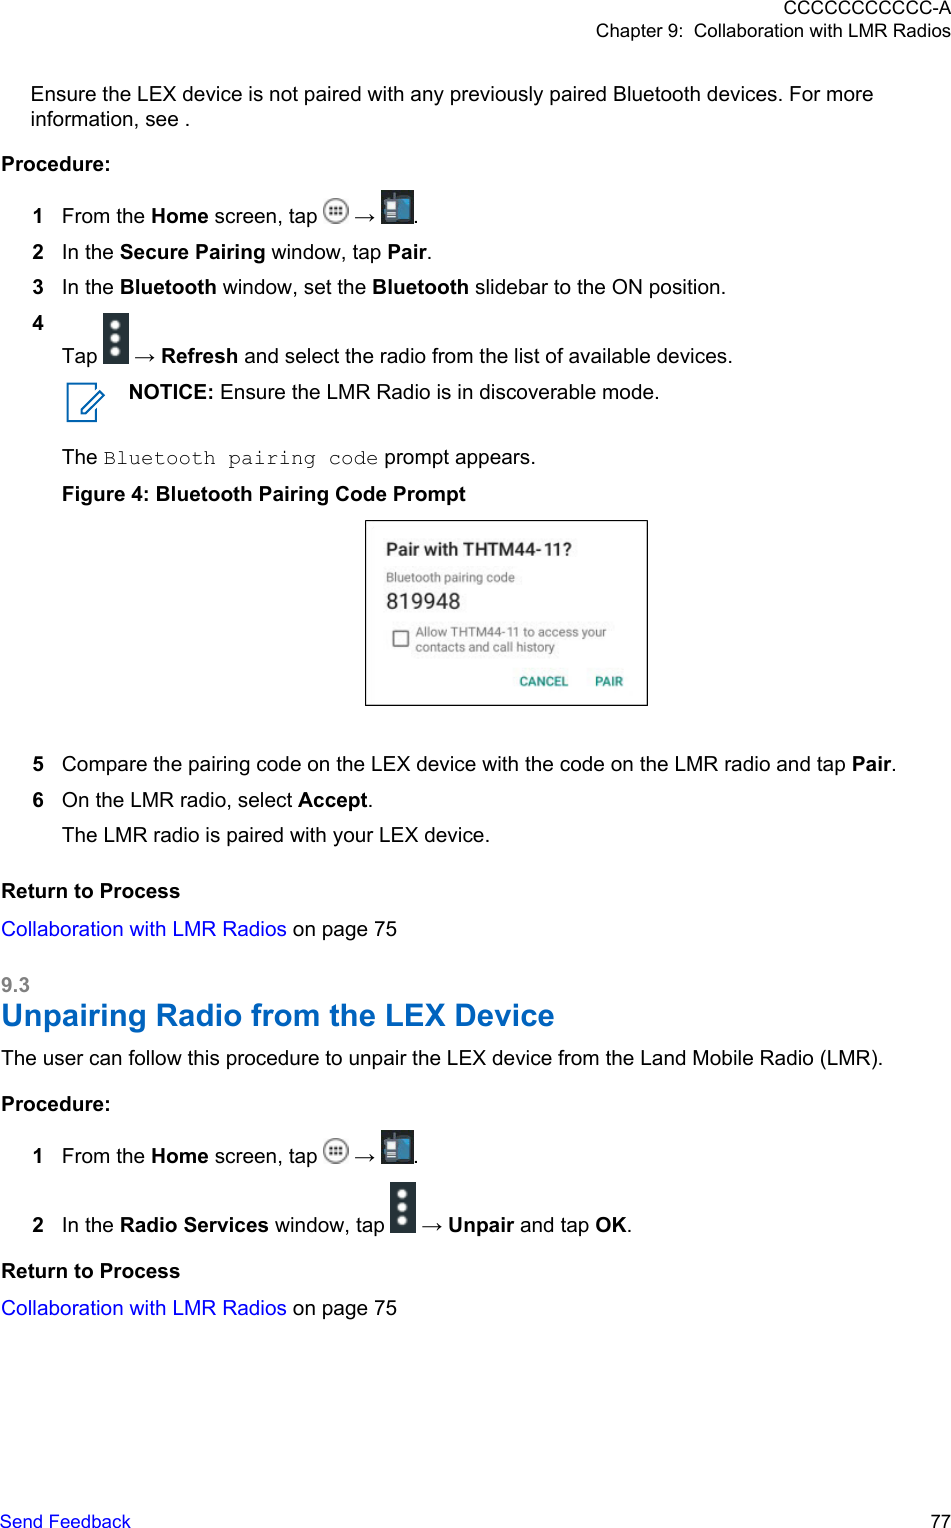 Ensure the LEX device is not paired with any previously paired Bluetooth devices. For moreinformation, see .Procedure:1From the Home screen, tap   →  .2In the Secure Pairing window, tap Pair.3In the Bluetooth window, set the Bluetooth slidebar to the ON position.4Tap   → Refresh and select the radio from the list of available devices.NOTICE: Ensure the LMR Radio is in discoverable mode.The Bluetooth pairing code prompt appears.Figure 4: Bluetooth Pairing Code Prompt5Compare the pairing code on the LEX device with the code on the LMR radio and tap Pair.6On the LMR radio, select Accept.The LMR radio is paired with your LEX device.Return to ProcessCollaboration with LMR Radios on page 759.3Unpairing Radio from the LEX DeviceThe user can follow this procedure to unpair the LEX device from the Land Mobile Radio (LMR).Procedure:1From the Home screen, tap   →  .2In the Radio Services window, tap   → Unpair and tap OK.Return to ProcessCollaboration with LMR Radios on page 75CCCCCCCCCCC-AChapter 9:  Collaboration with LMR RadiosSend Feedback   77